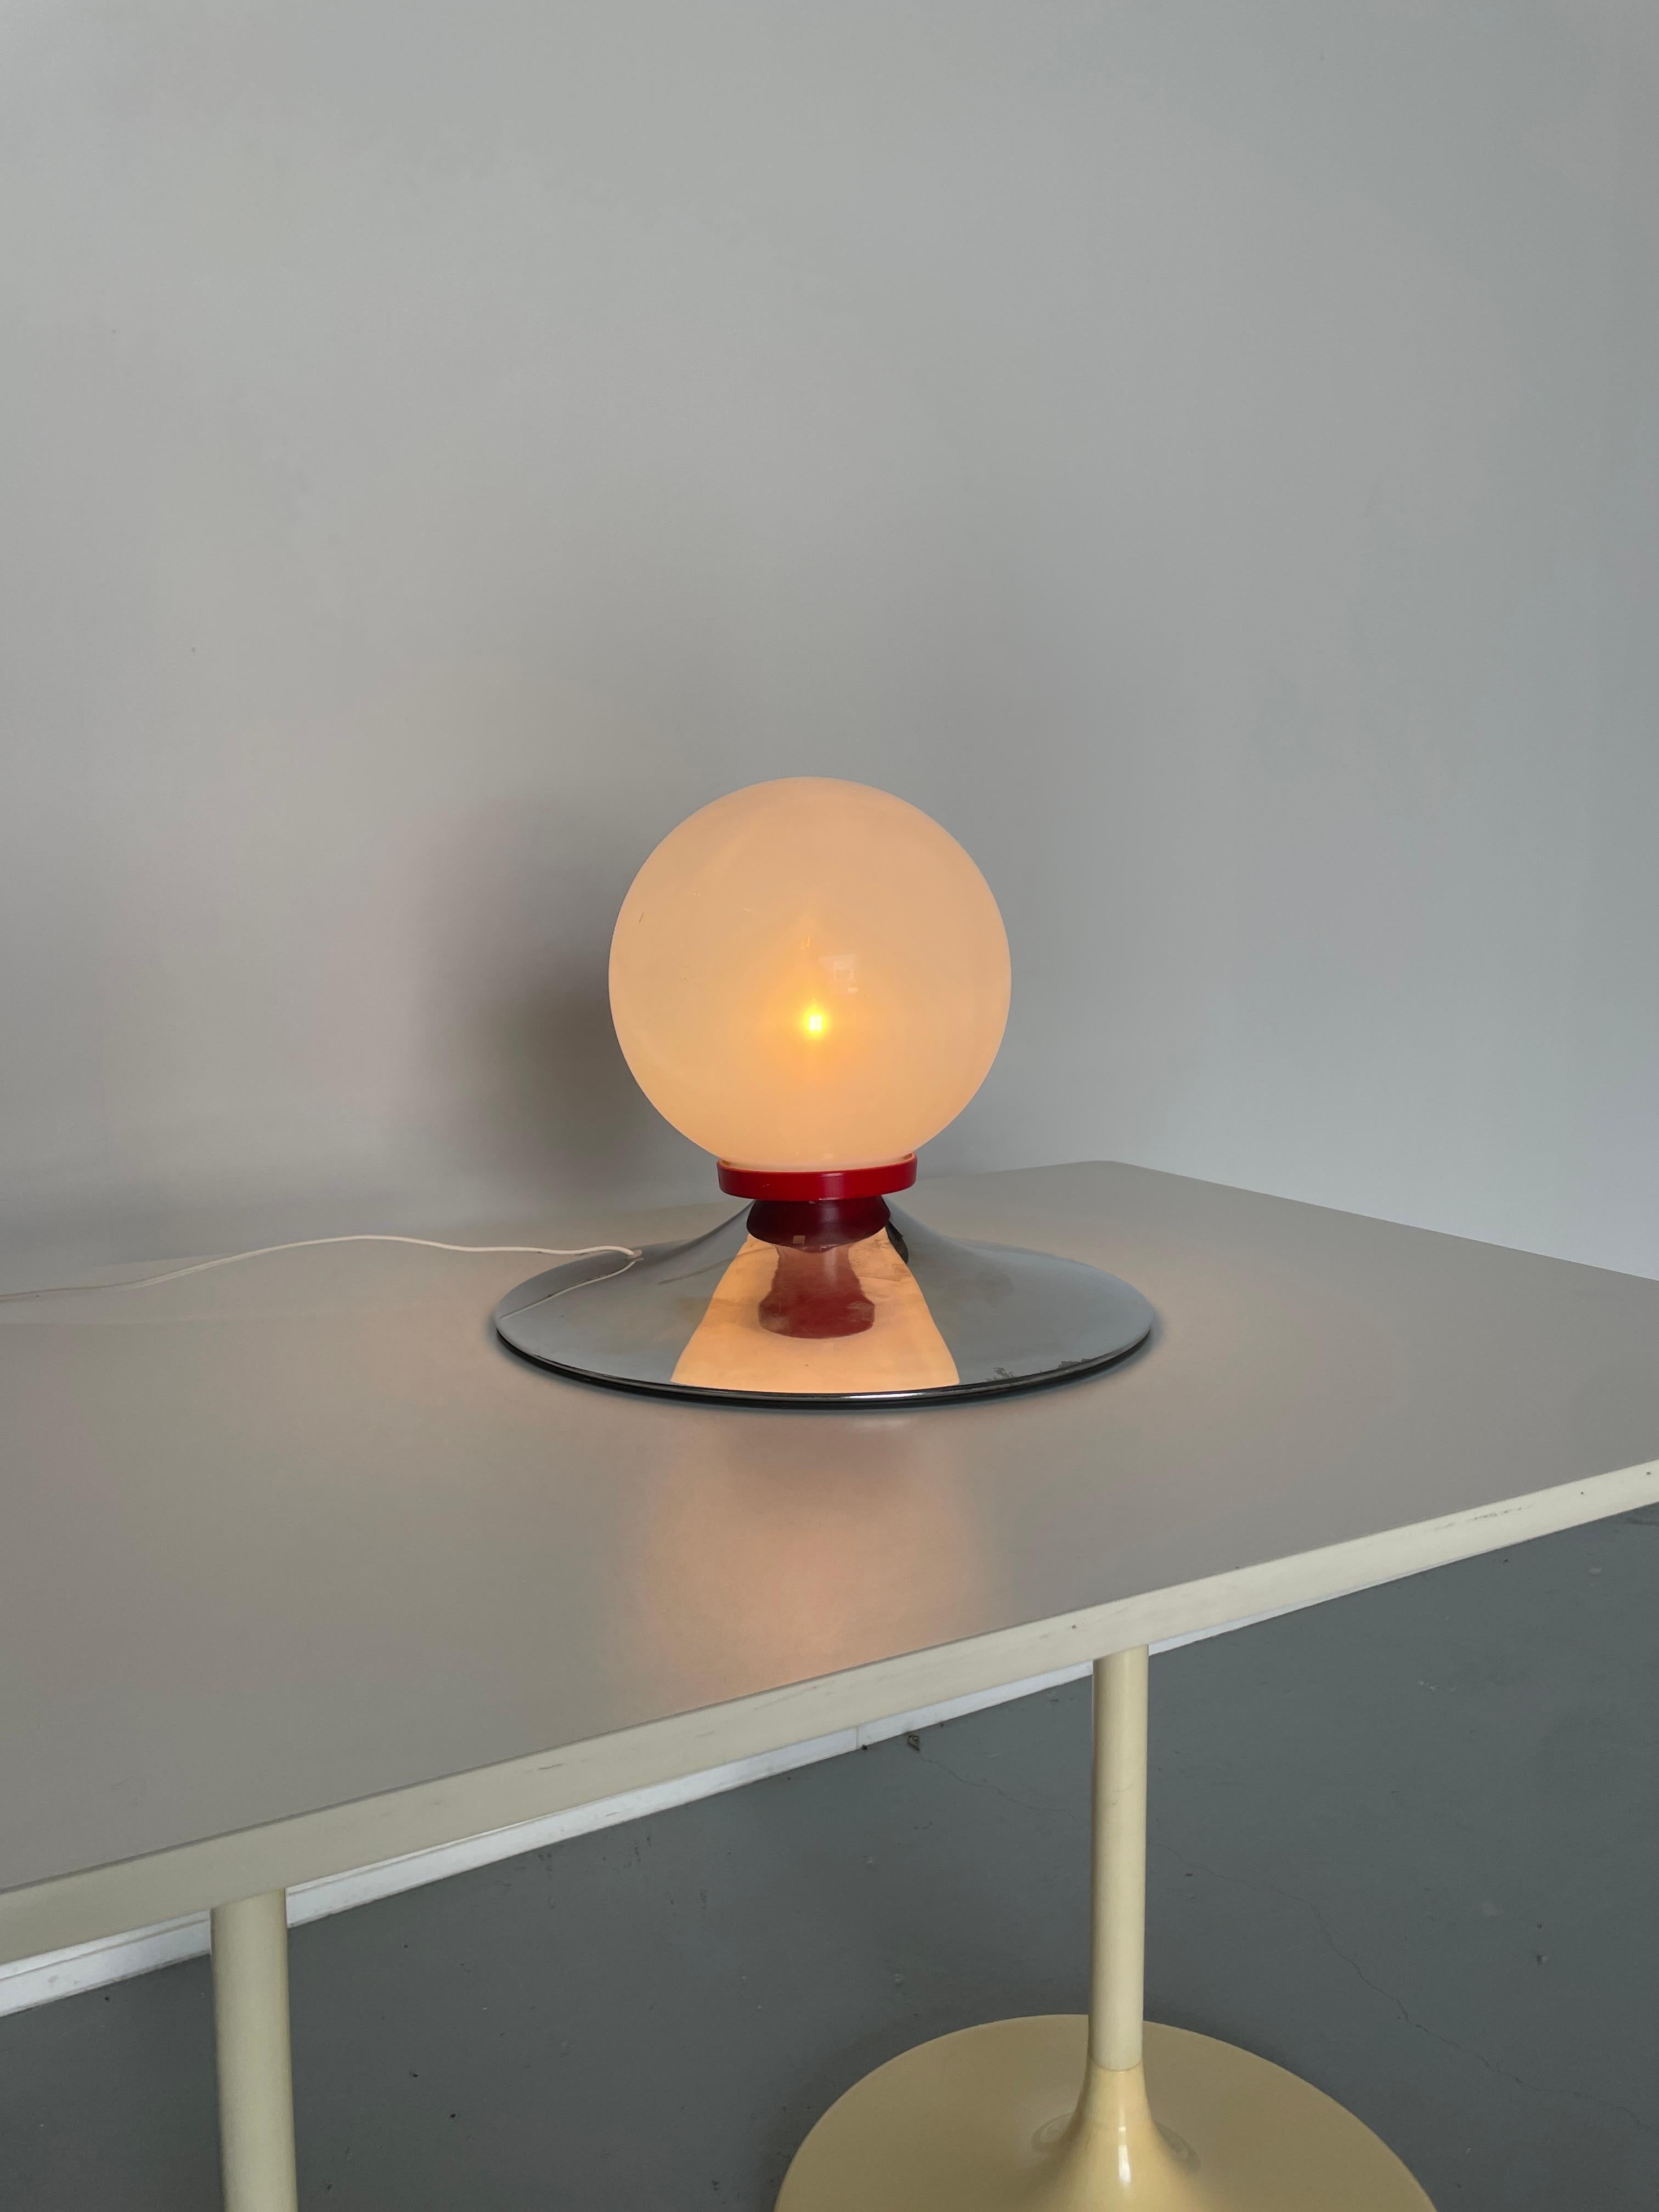 Vintage Plastic White Sphere and Chrome Table Lamp, 1970s Mid-Century Space Age  For Sale 4